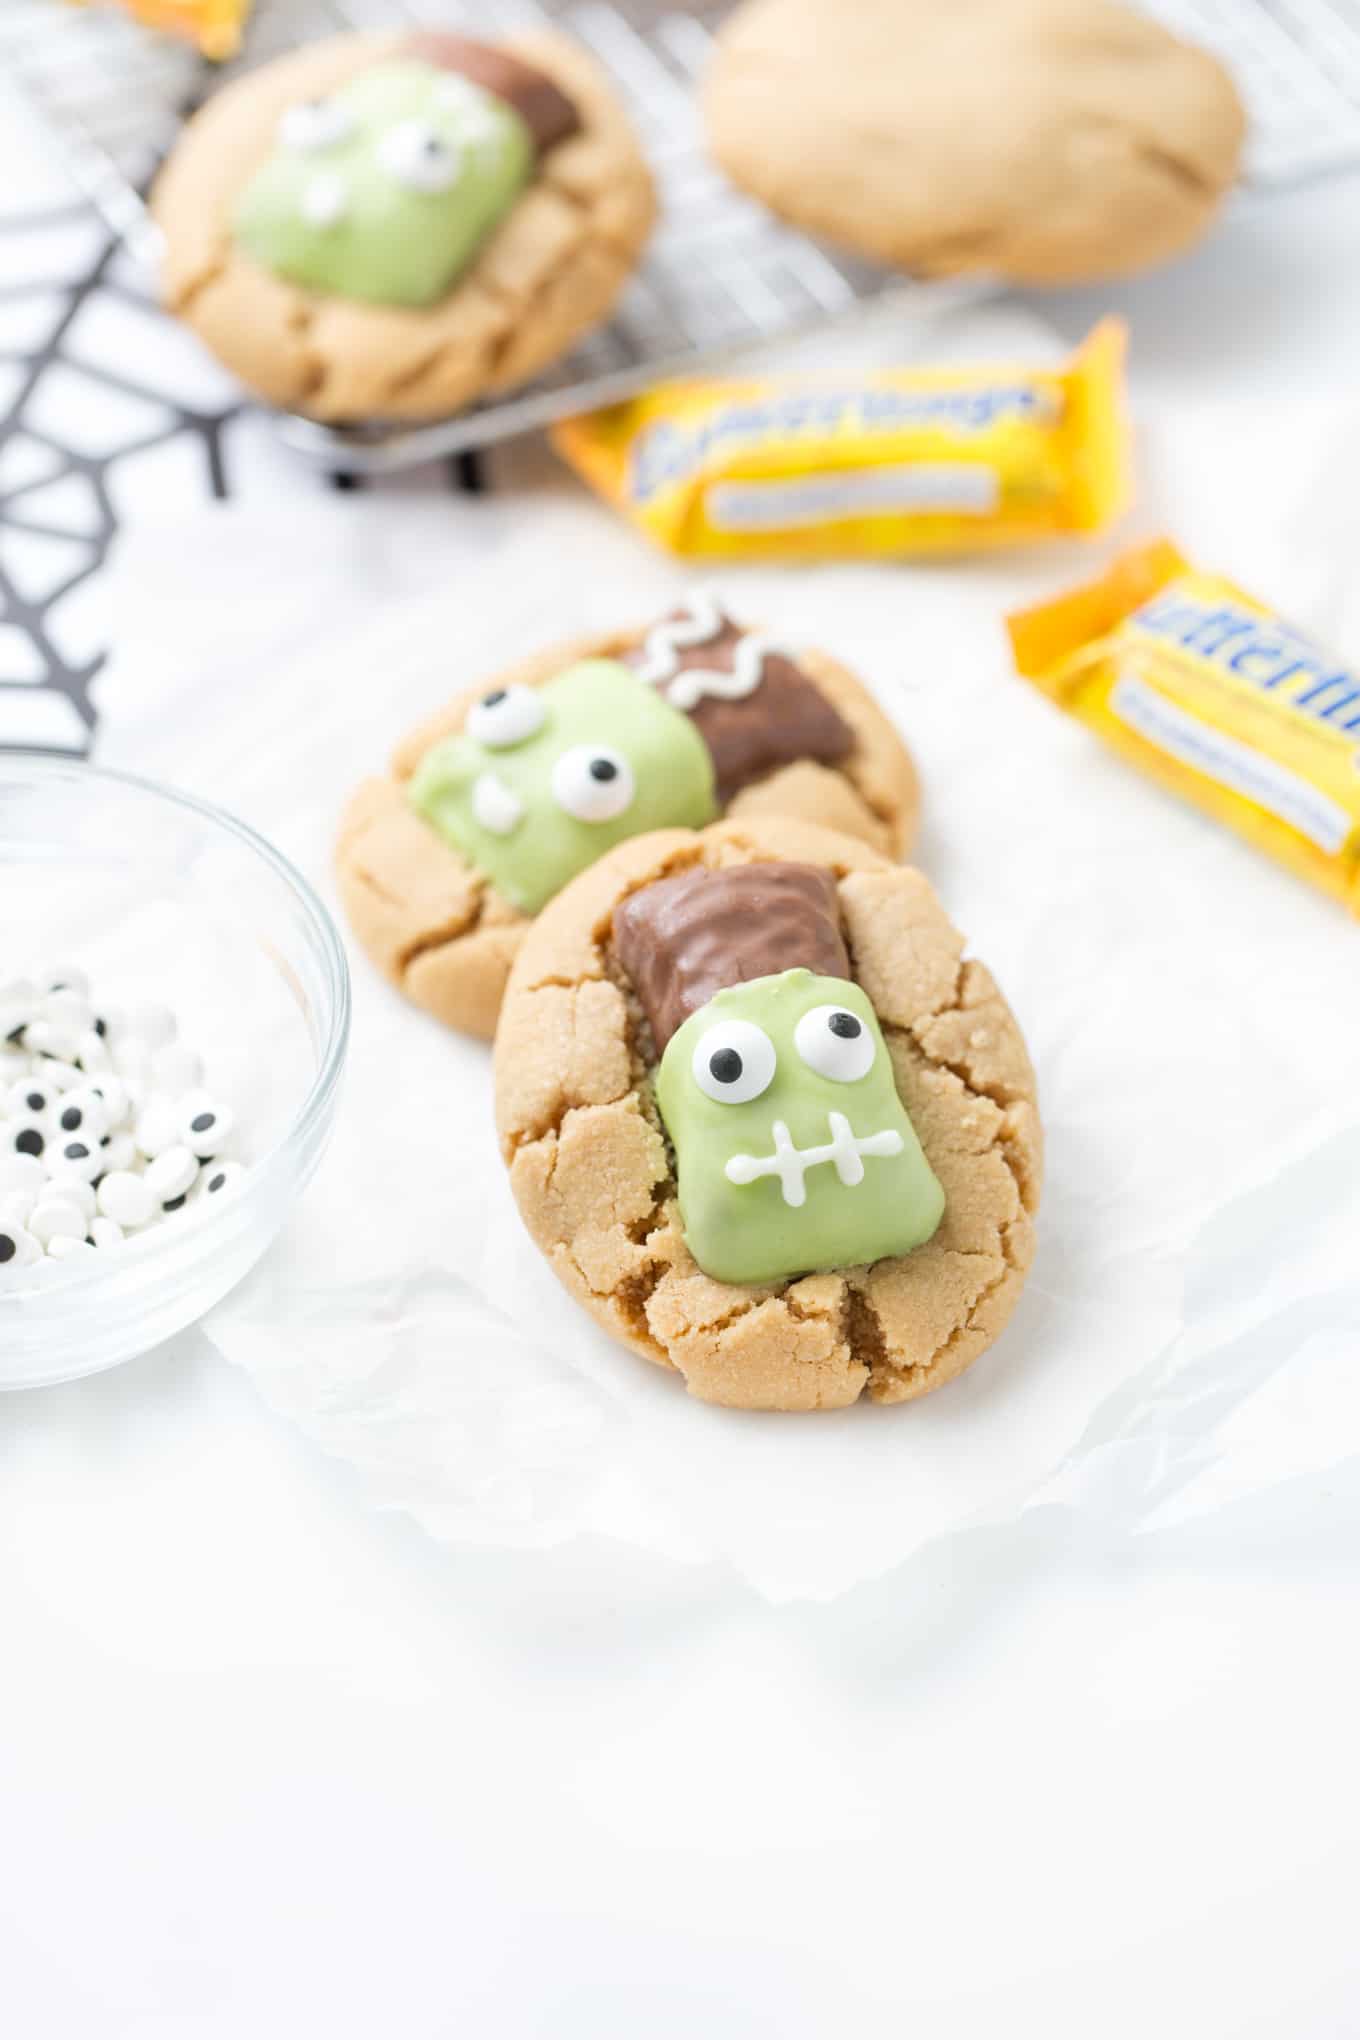 Peanut Butter Cookies topped with Frankenstein Butterfingers Candy Eyeballs